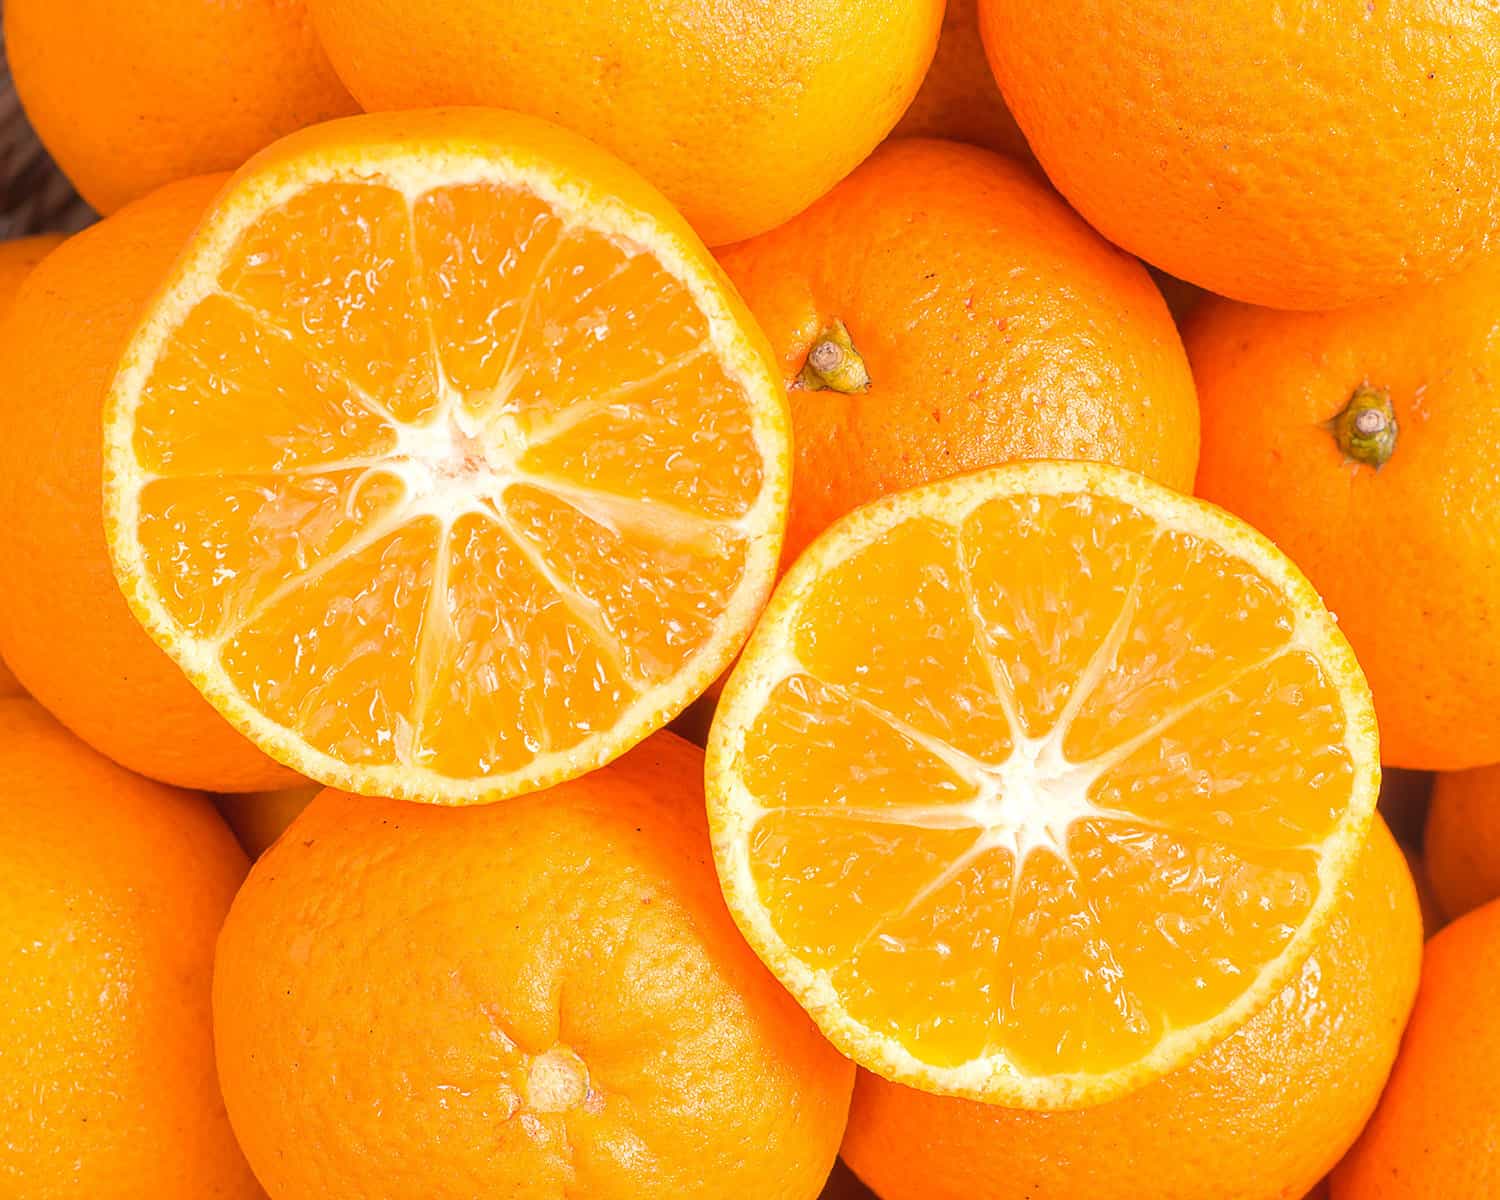 a group of oranges sits together in a photo with sliced oranges in the center of the frame.